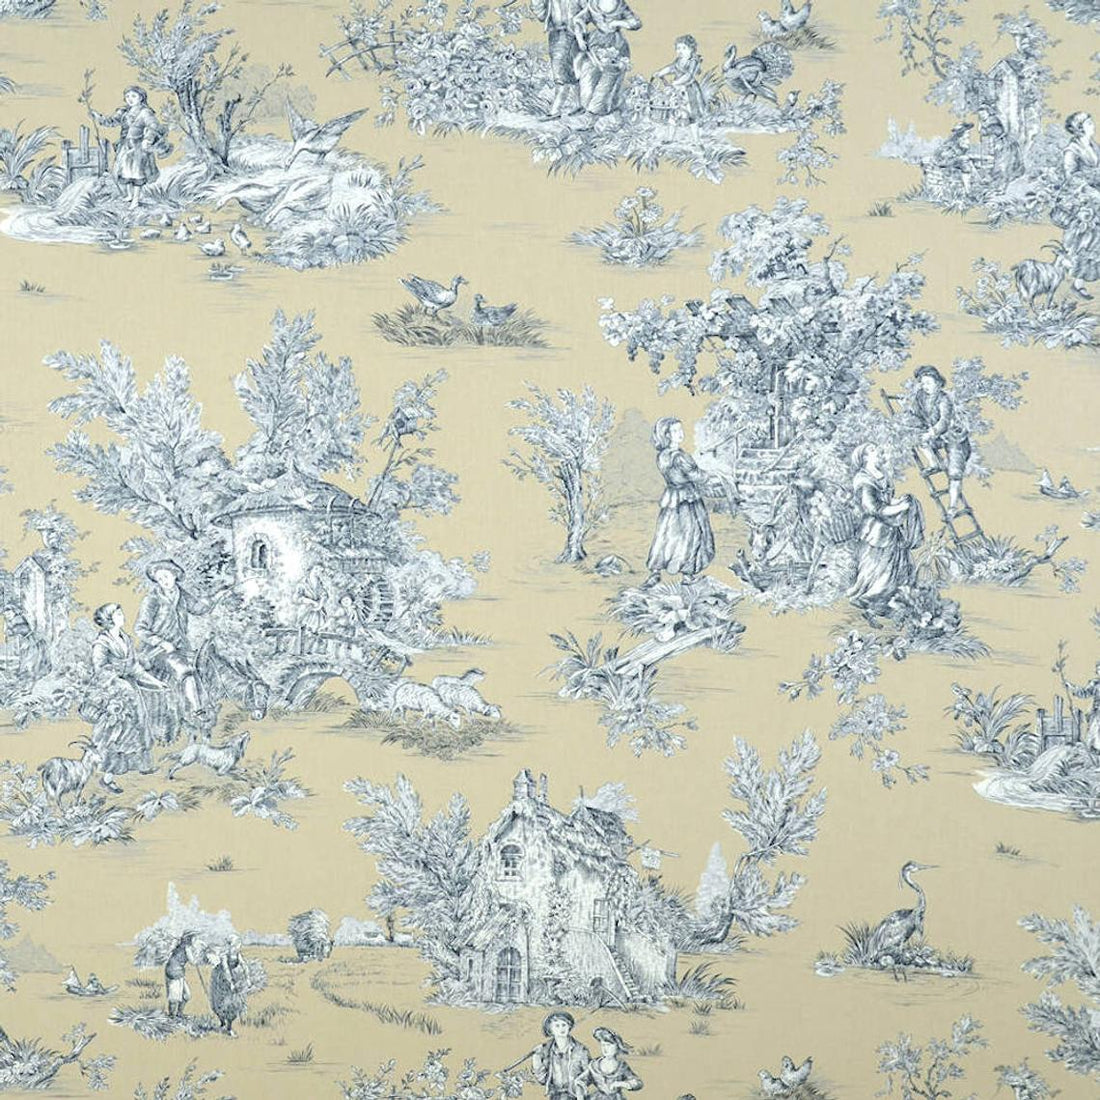 Duvet Cover in Pastorale #88 Blue on Beige French Country Toile ...